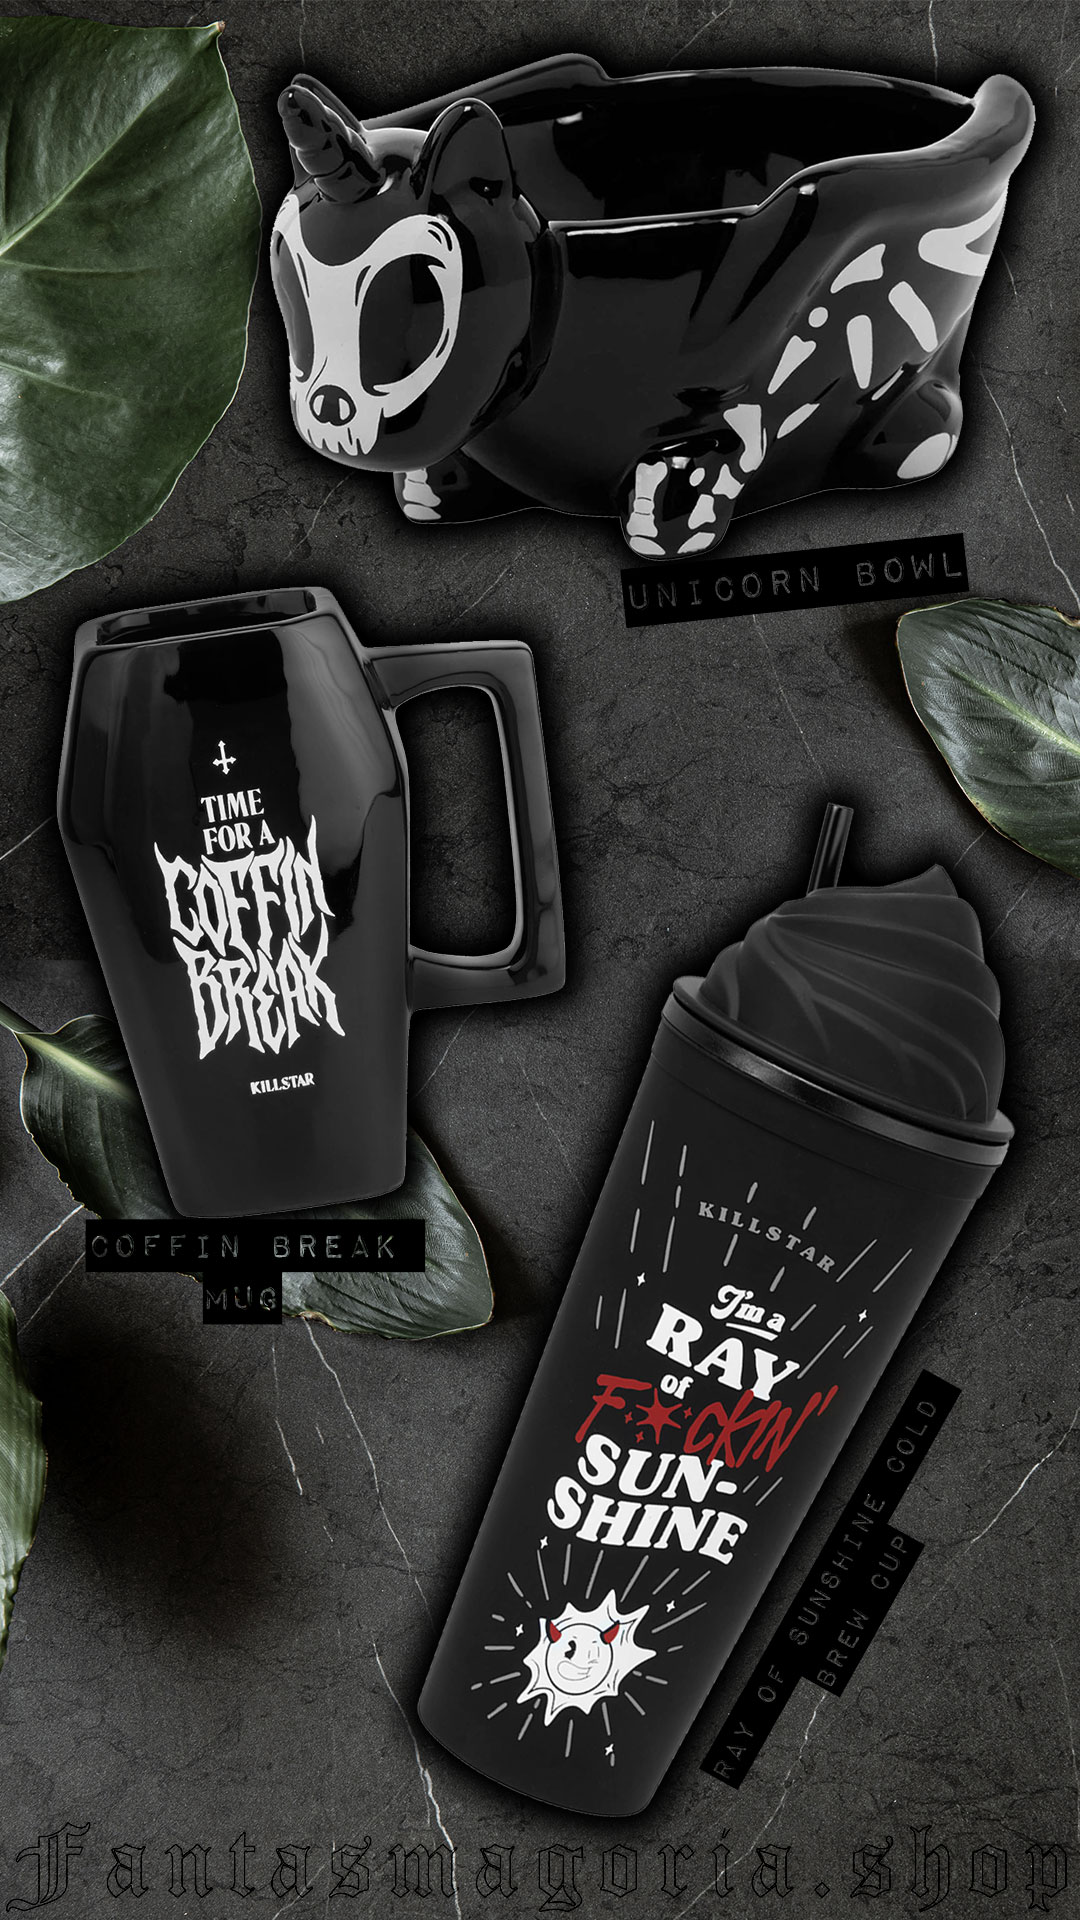 goth black coffin shaped mugs and bowls